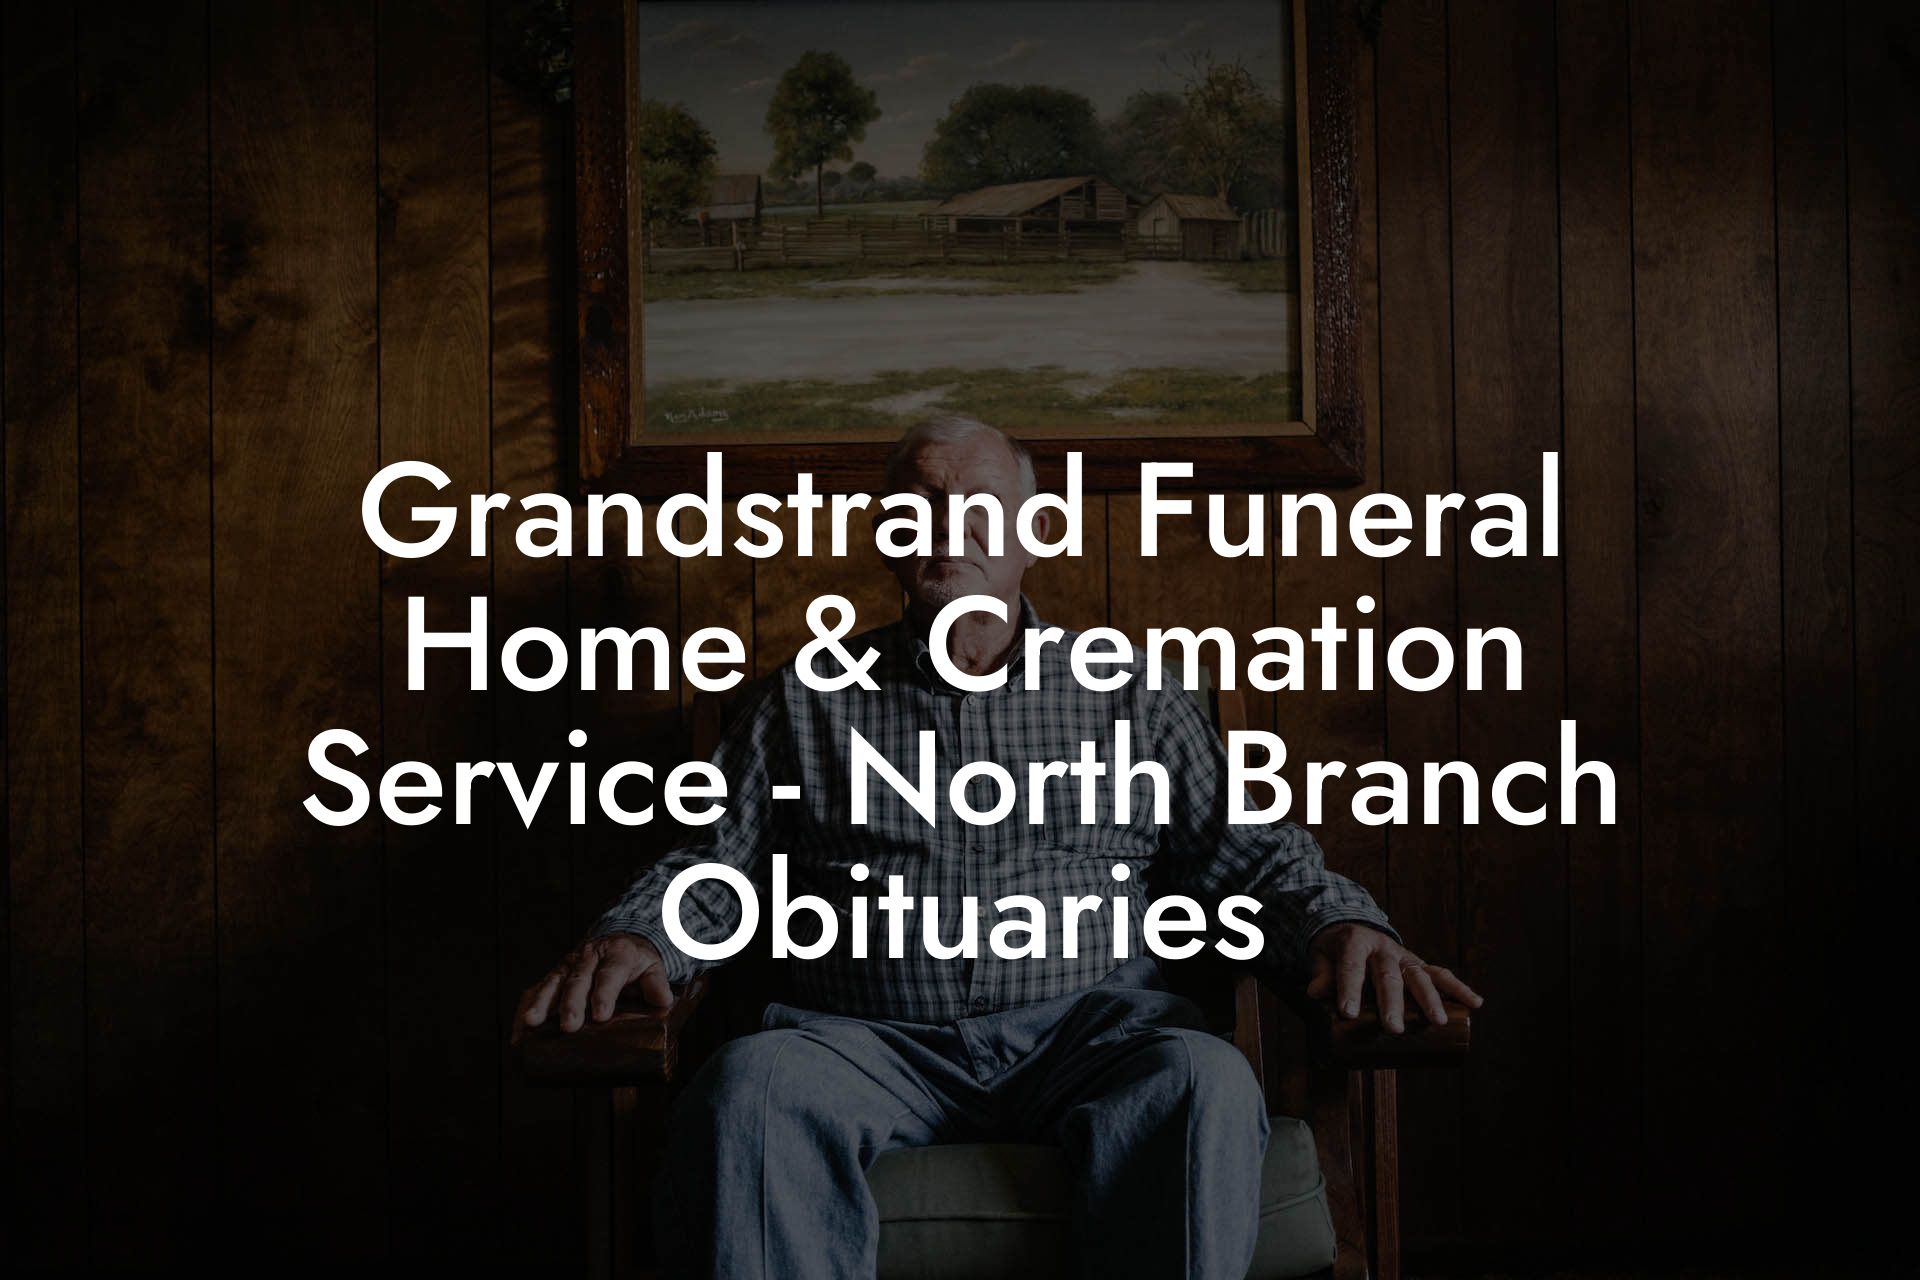 Grandstrand Funeral Home & Cremation Service - North Branch Obituaries